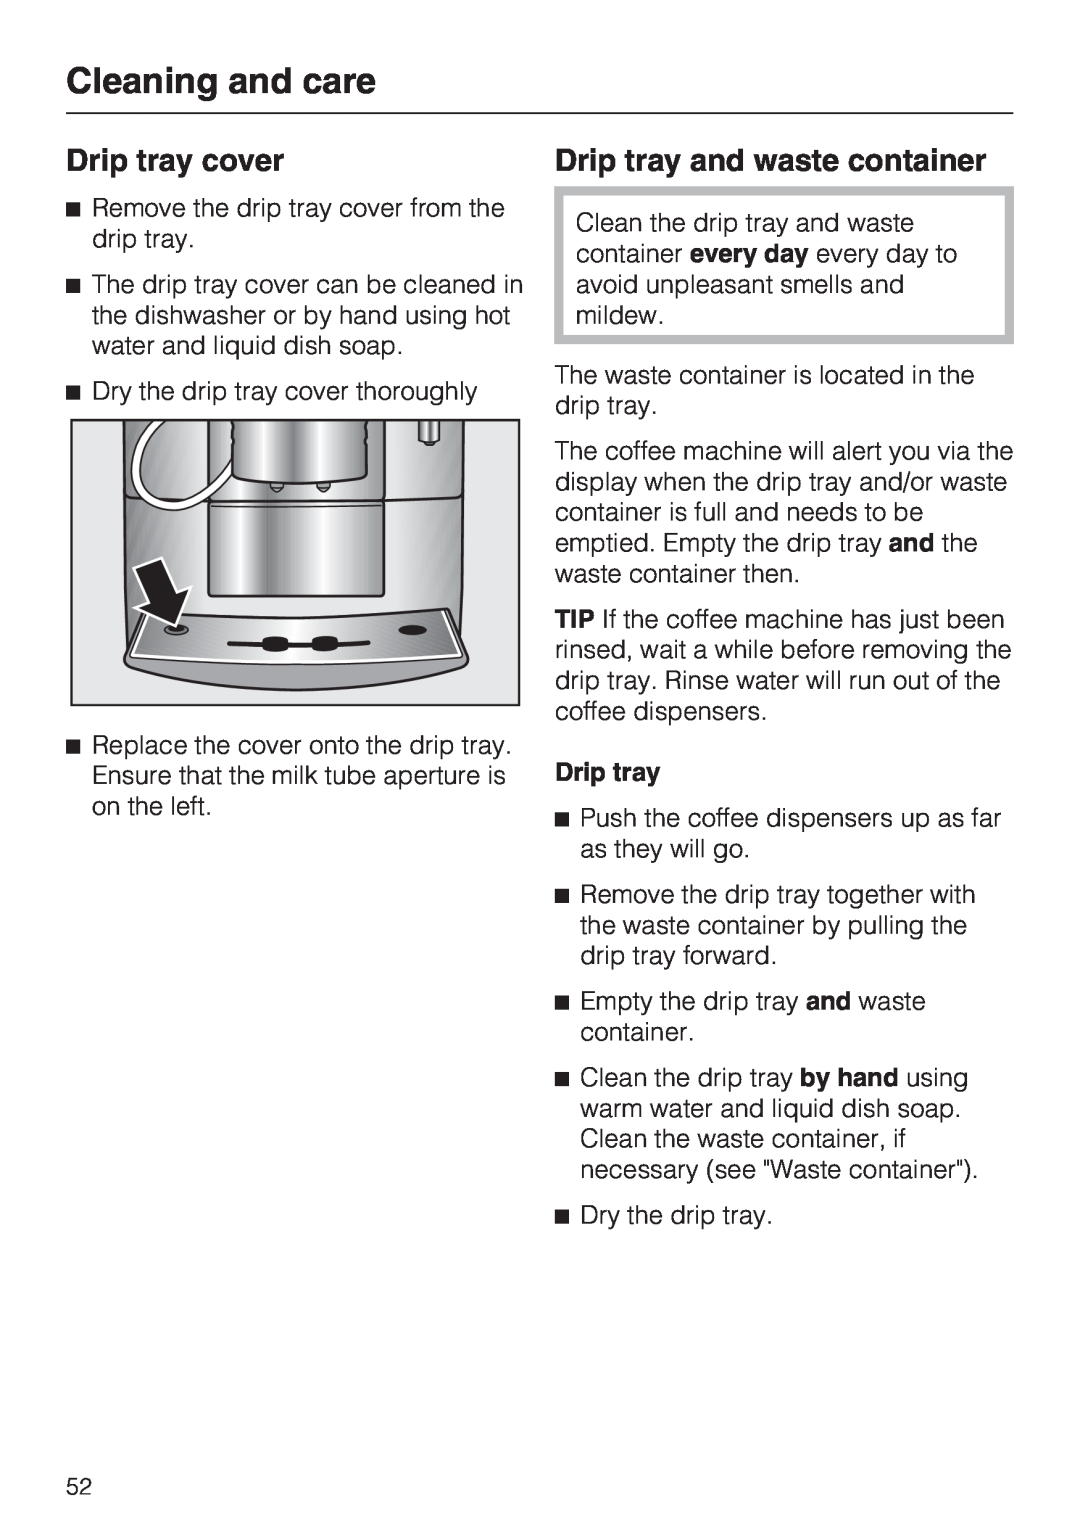 Miele CM 5200 manual Drip tray cover, Drip tray and waste container, Cleaning and care 